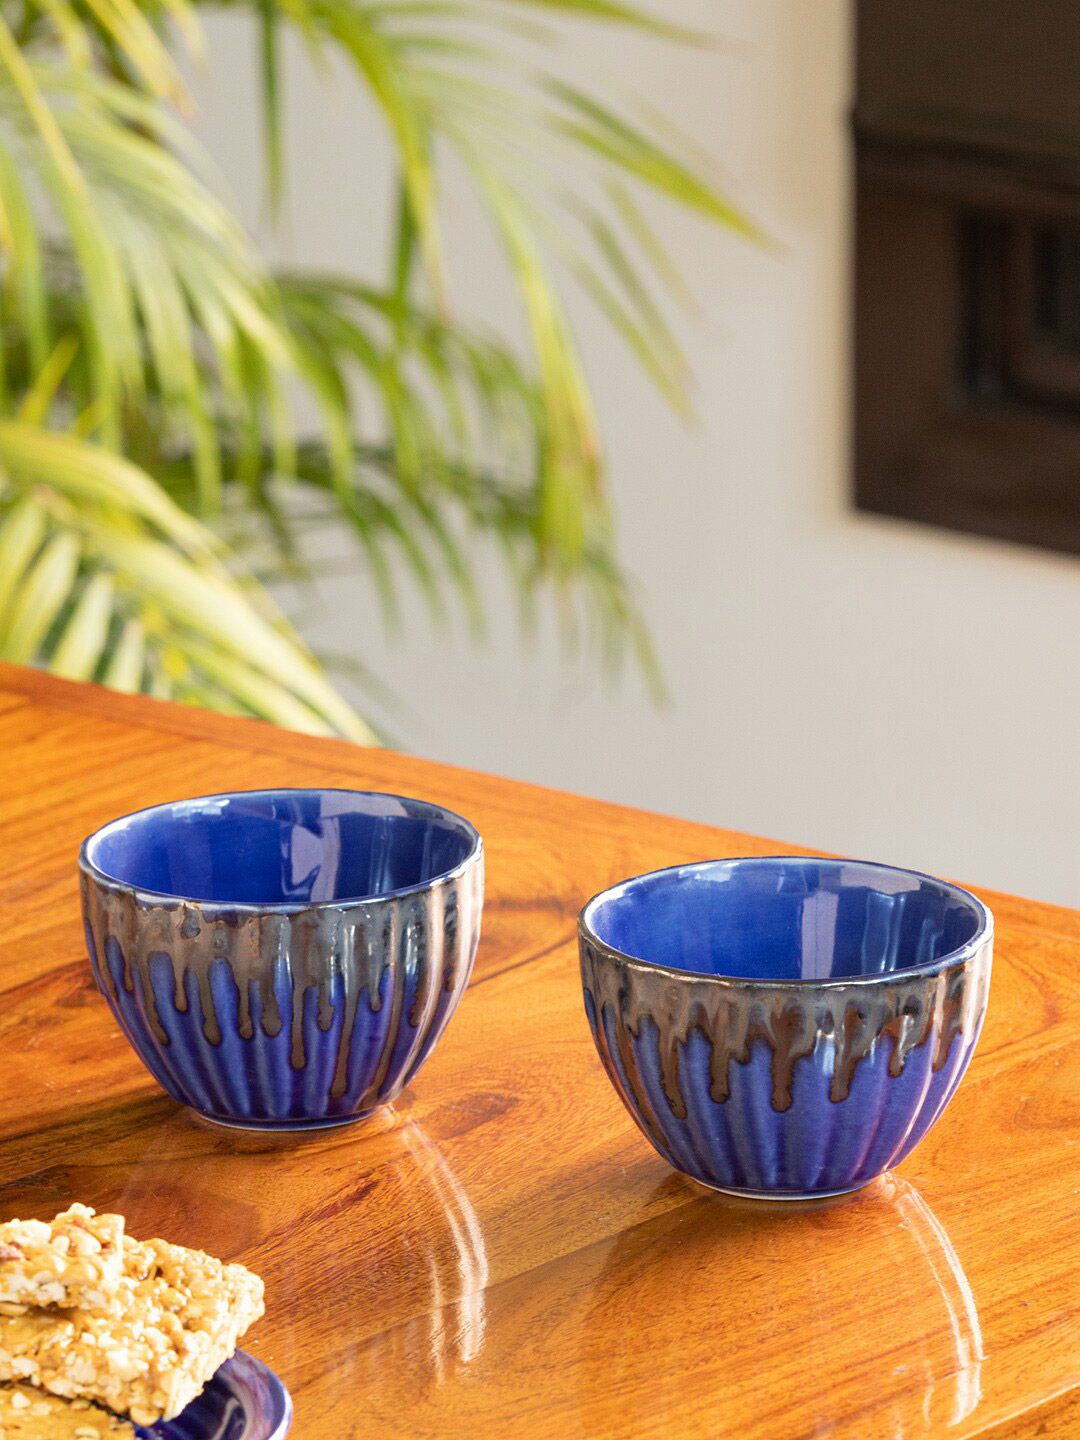 ExclusiveLane Teal & Grey 2 Pieces Handcrafted Ceramic Glossy Bowls Price in India